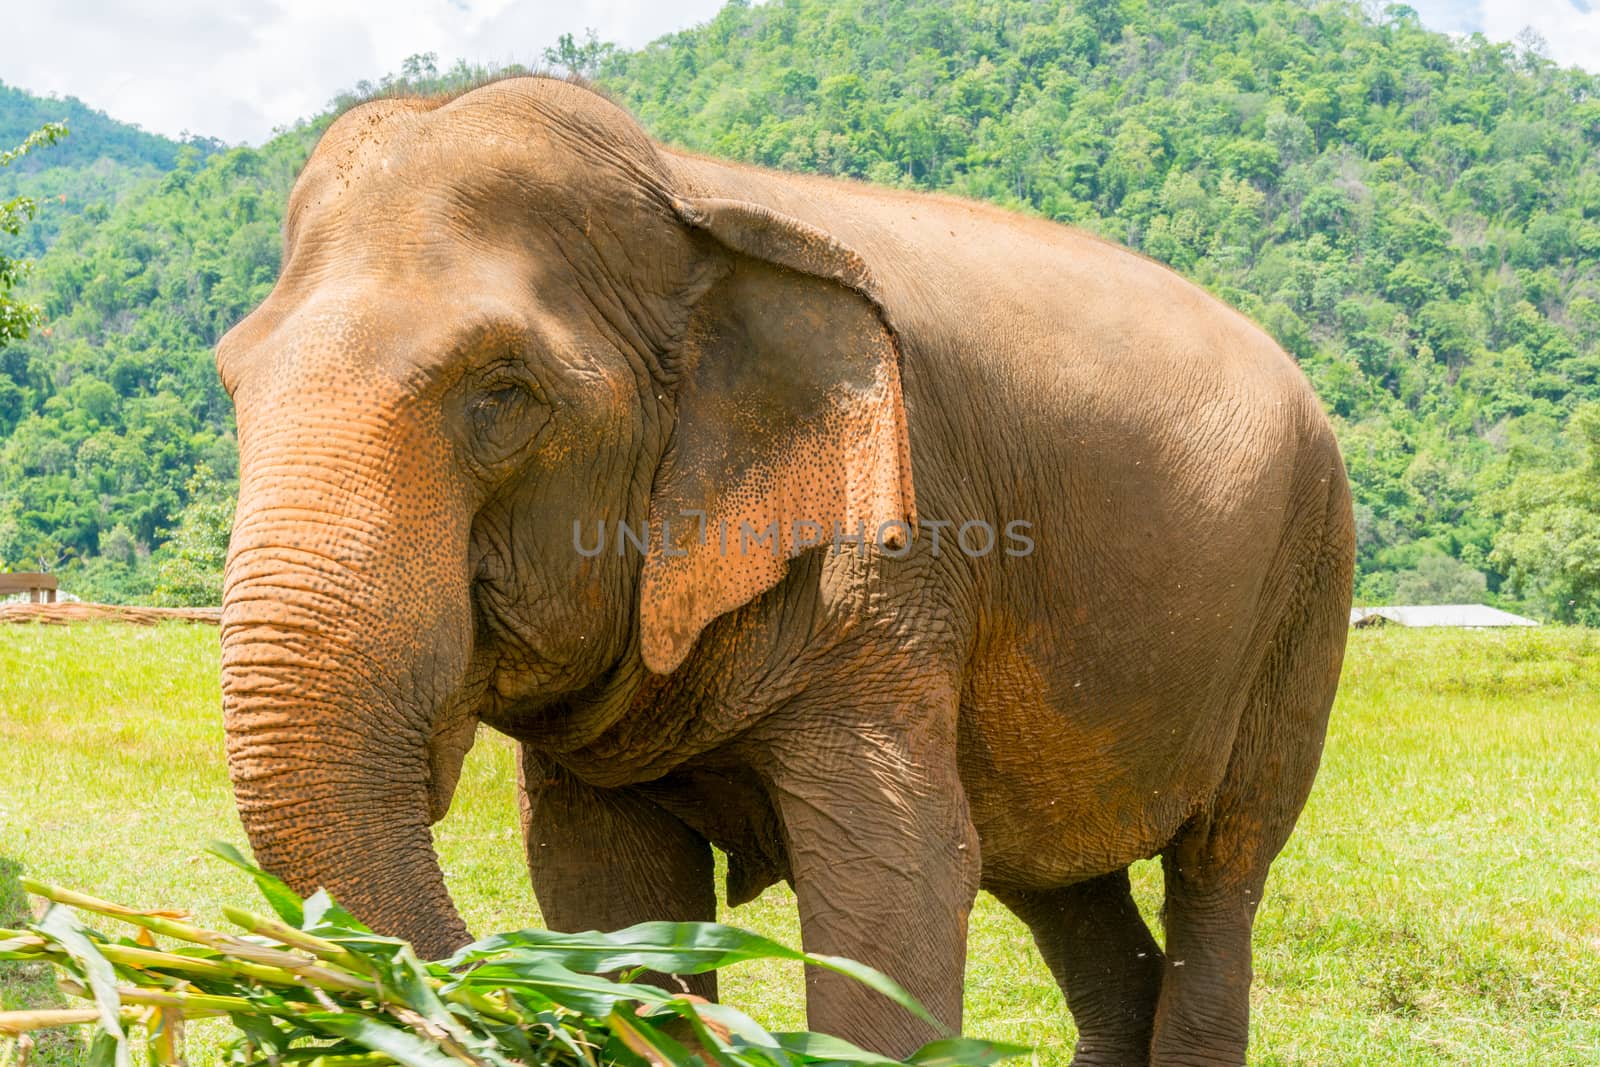 Elephant in protected nature park by nicousnake